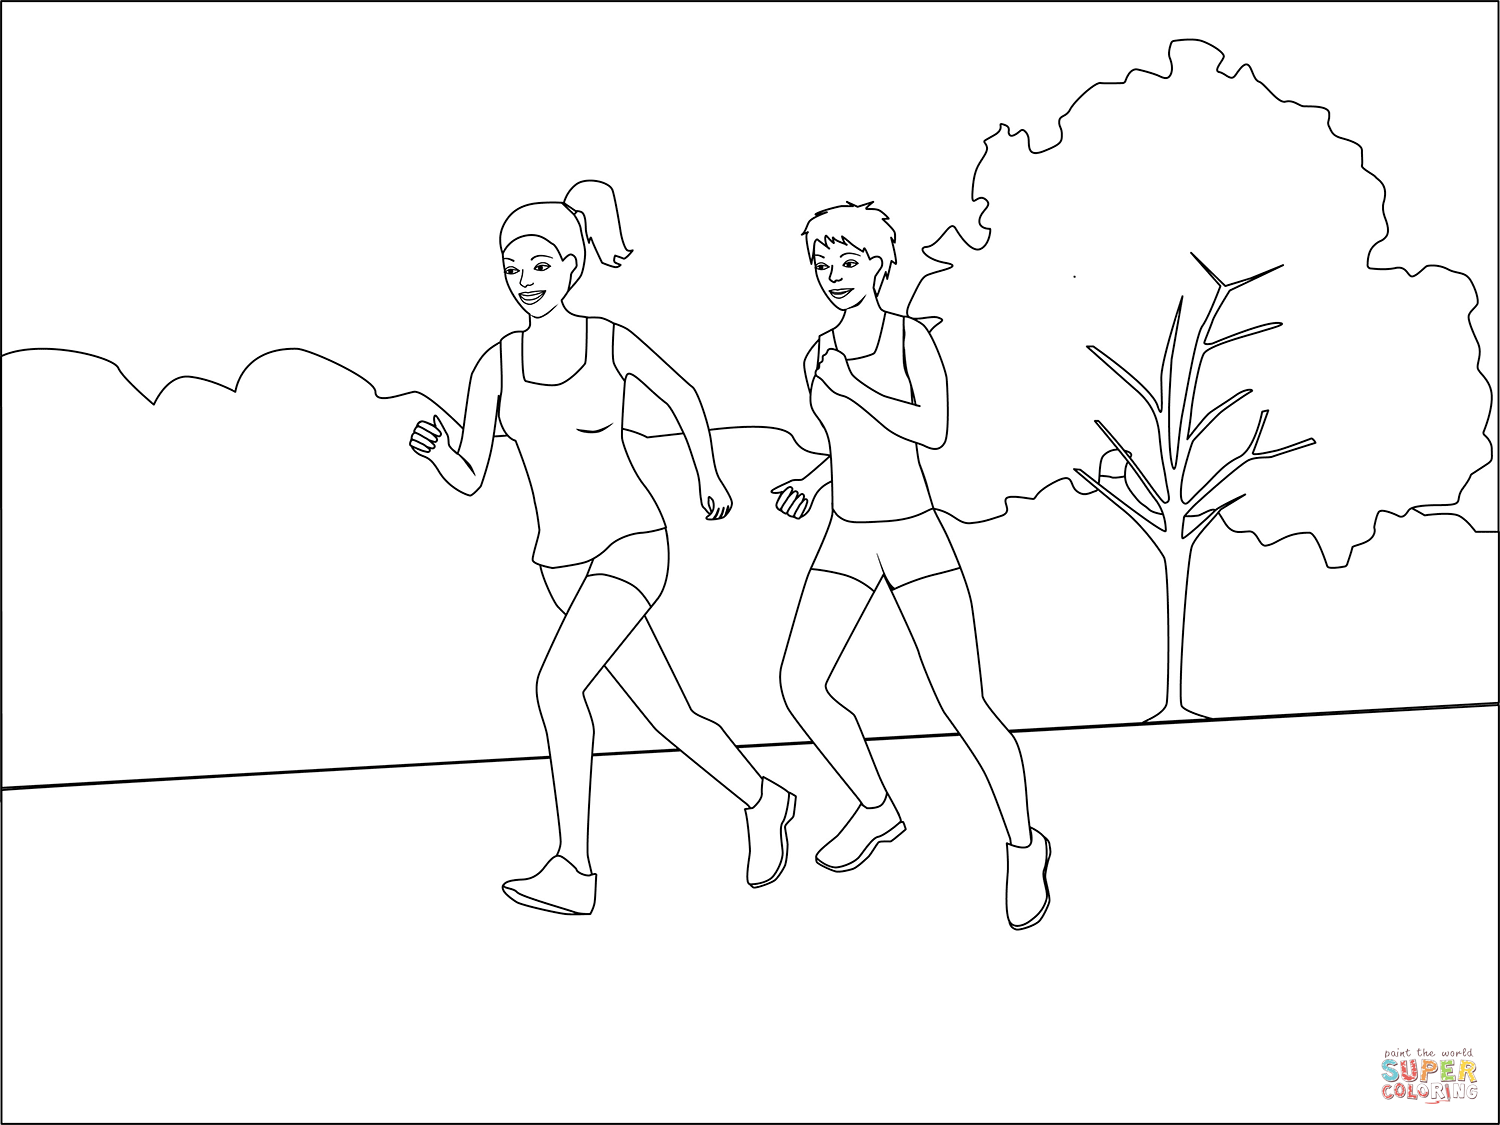 Runner Coloring Page